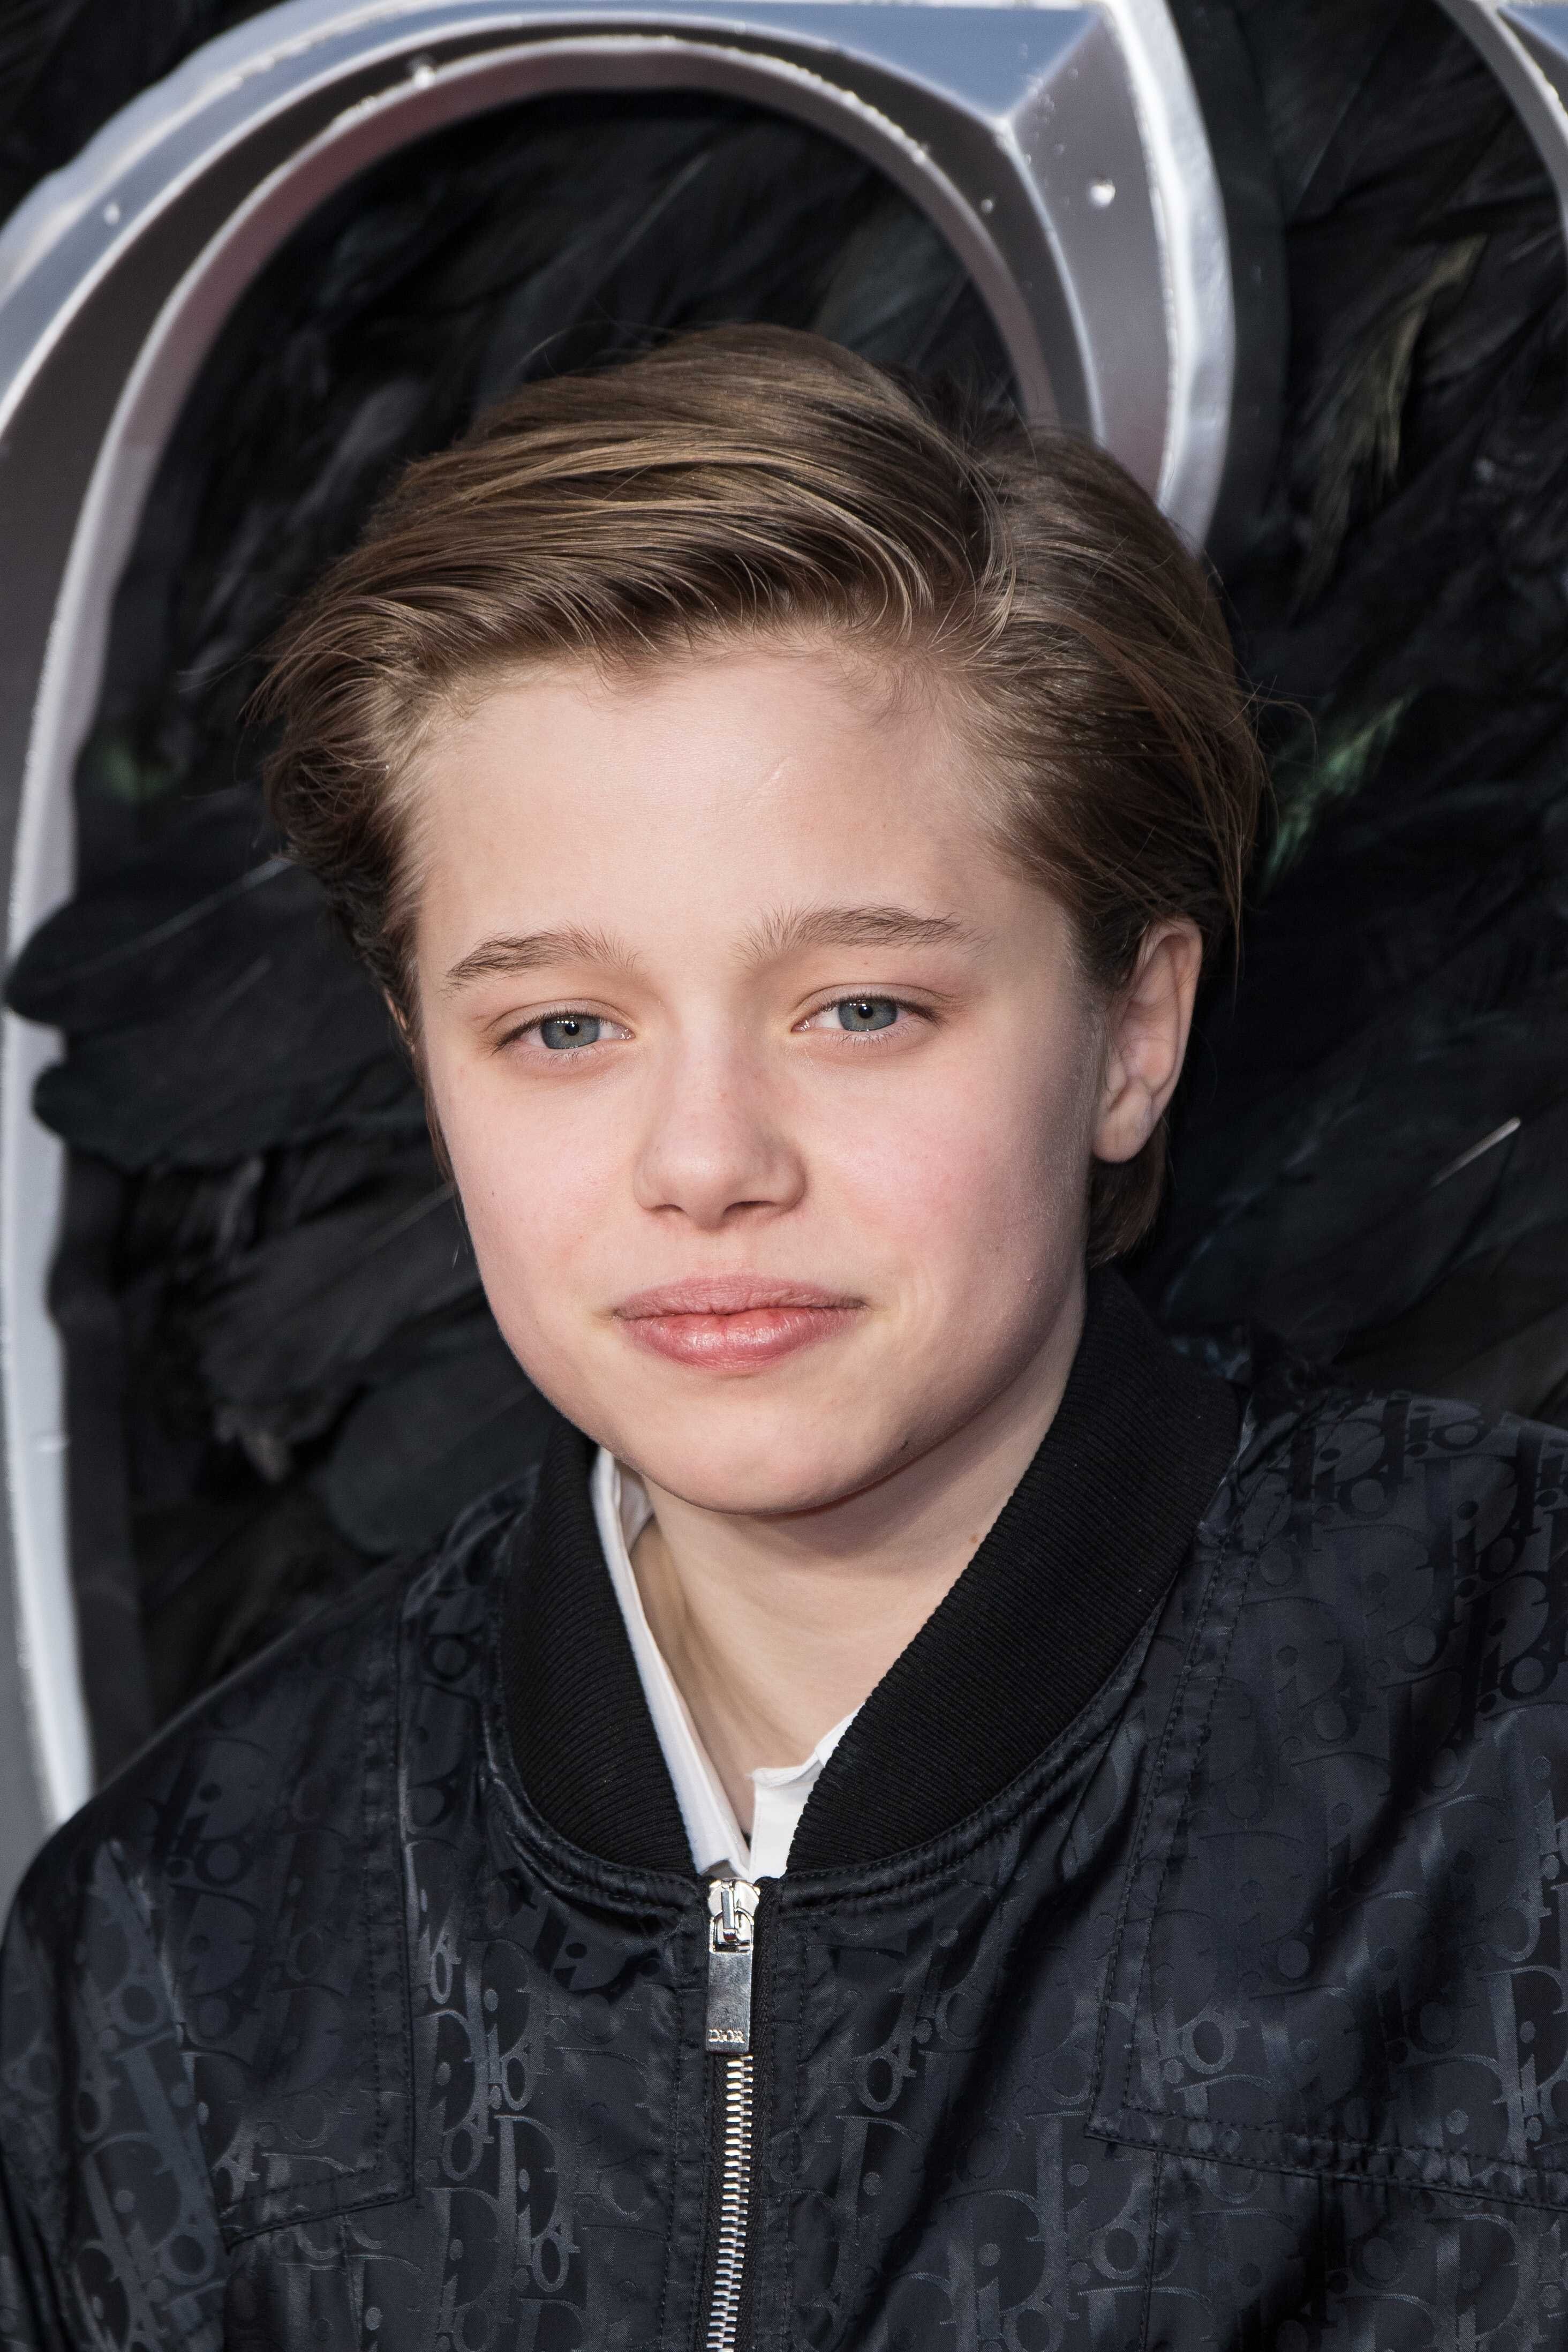 Shiloh Jolie-Pitt, who turned 14 in 2020, has become an LGBTQ+ icon to young kids around the world. Photo: Getty Images